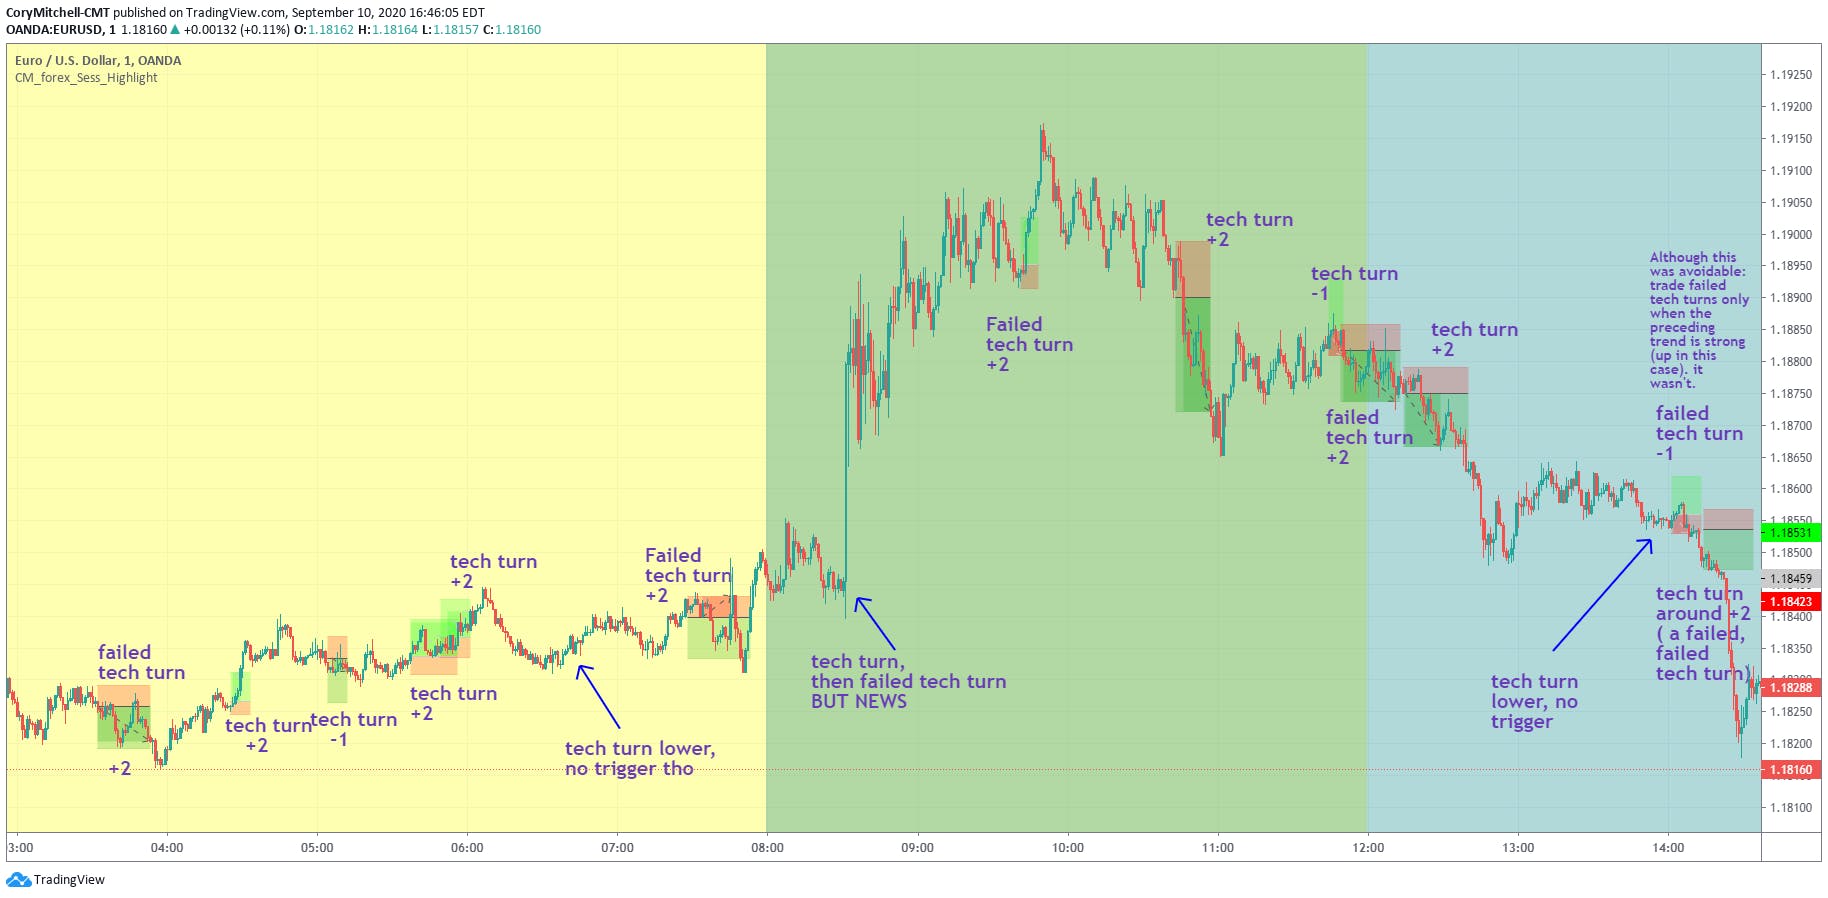 technical turnaround and failed technical turnaround day trading strategy examples in EURUSD